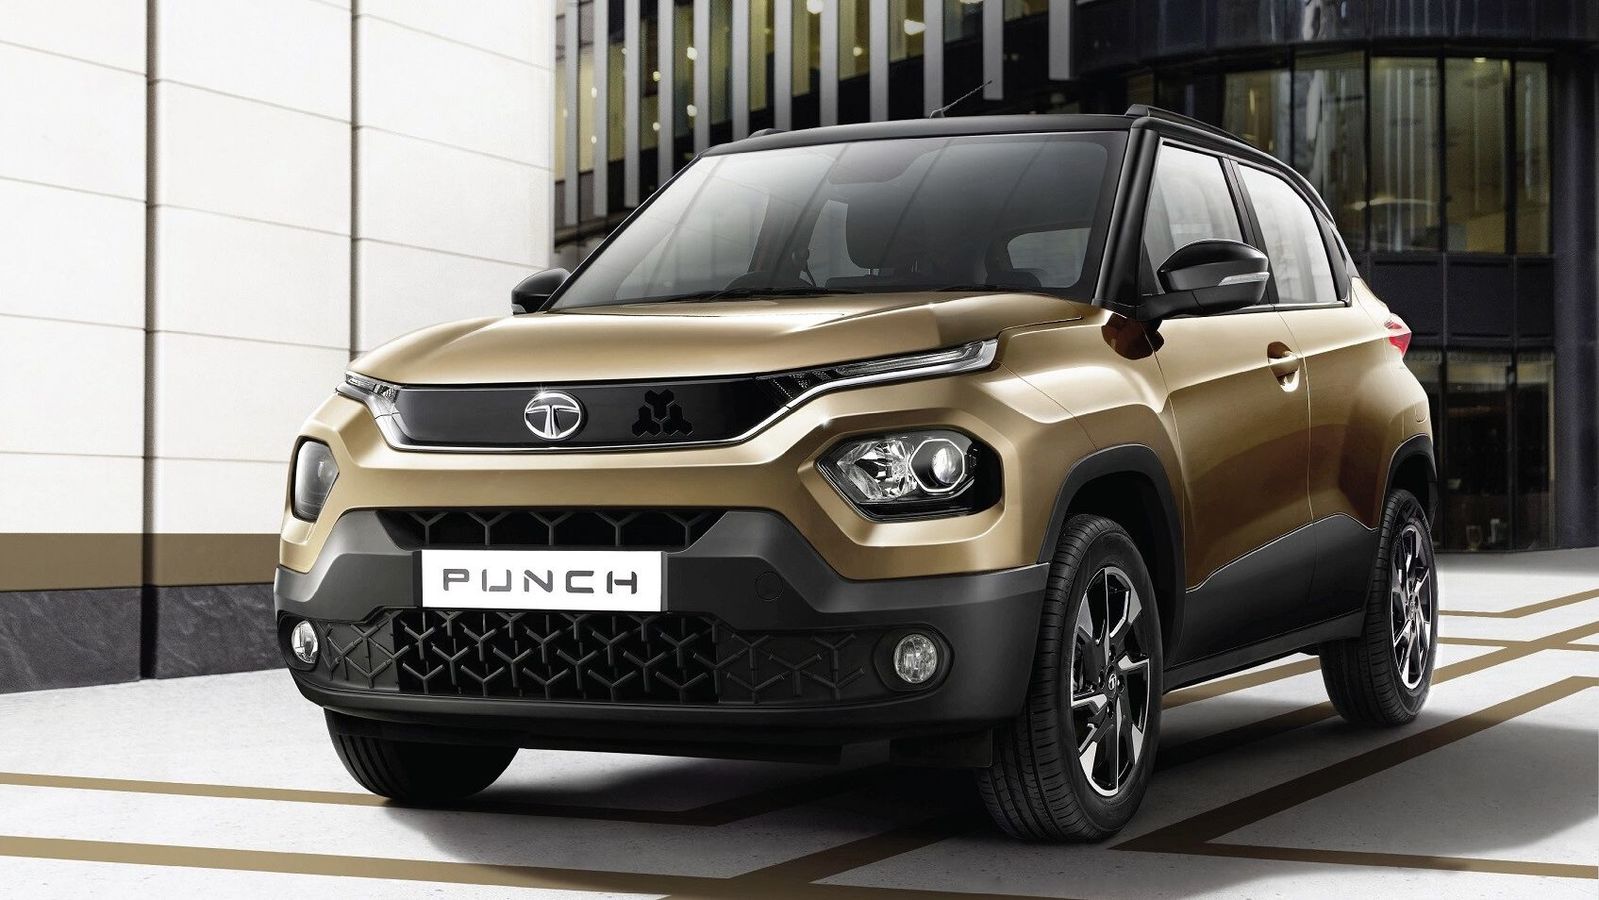 Tata Punch bookings open, price launch soon. Trims, features, specs explained | Car News